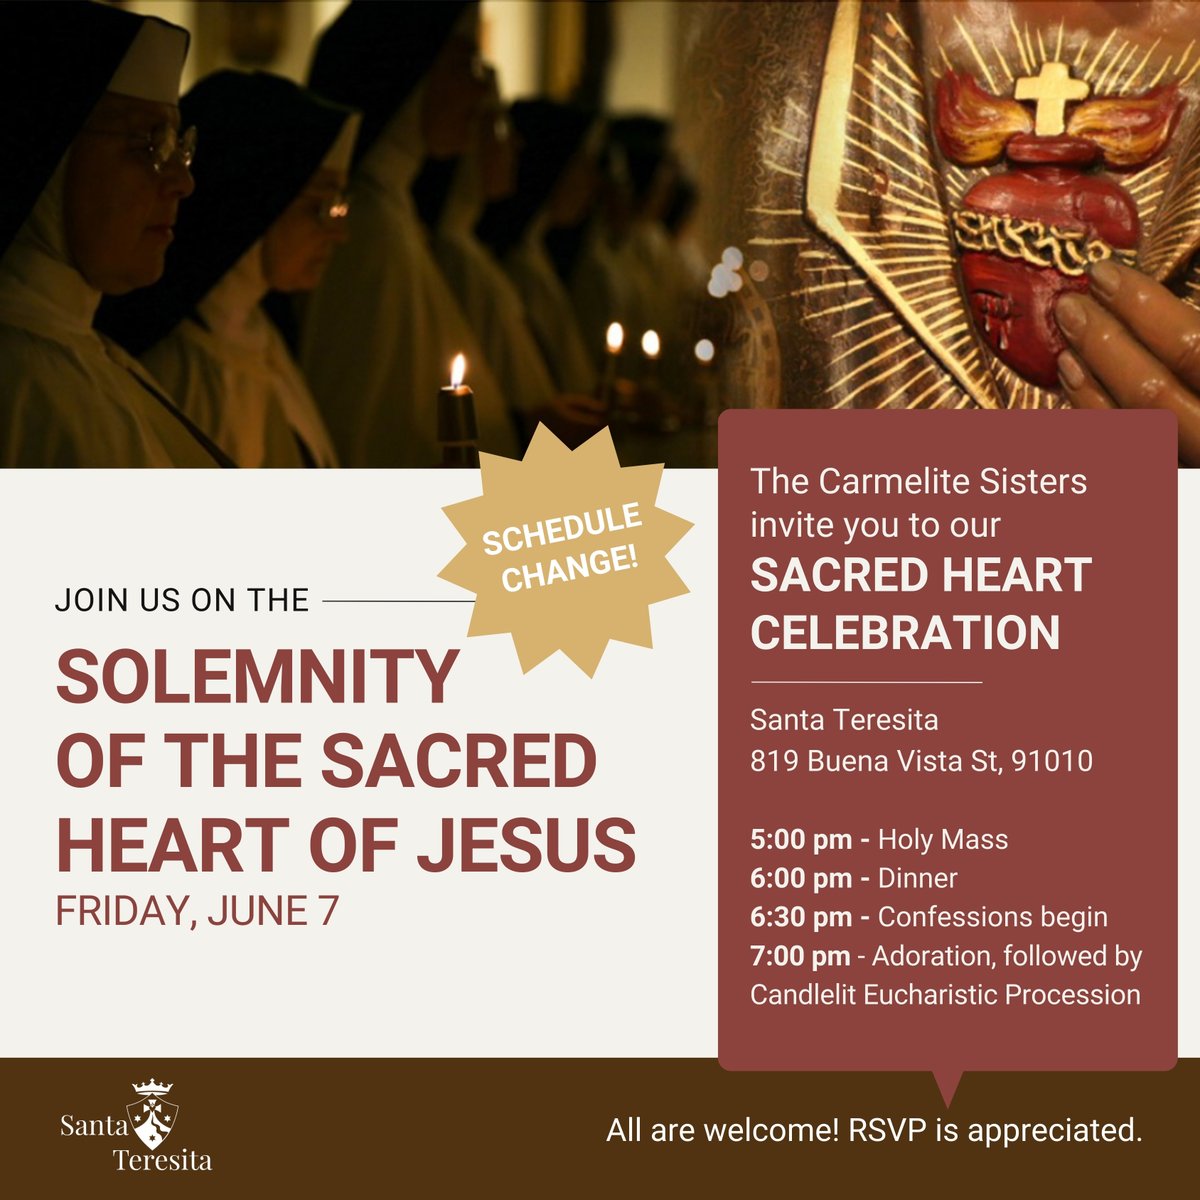 June 7 | Join us for our Sacred Heart Celebration at Santa Teresita for Reclaim Hope. Experience the love & consolation of the Sacred Heart of Jesus. All are welcome! Please kindly RSVP for an accurate count for our complimentary dinner. ❤️‍🔥 | RSVP: bit.ly/ff24-x